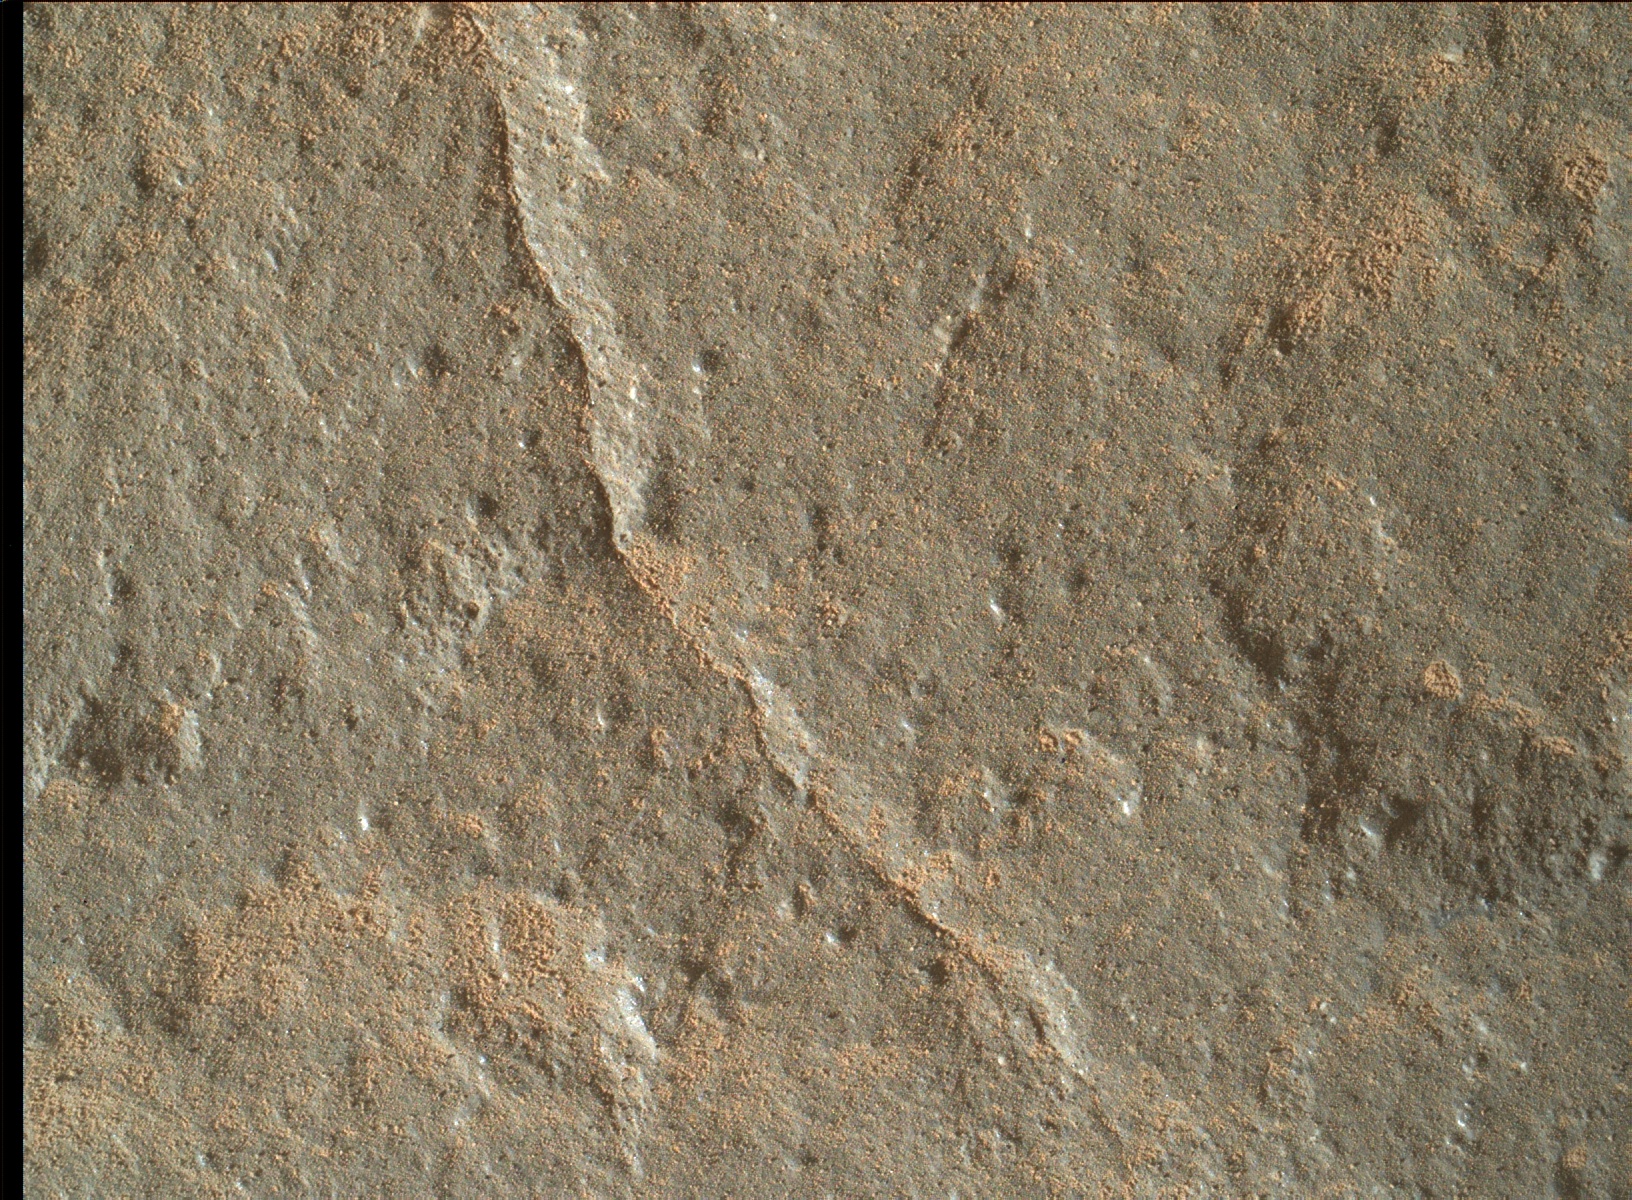 Nasa's Mars rover Curiosity acquired this image using its Mars Hand Lens Imager (MAHLI) on Sol 1150